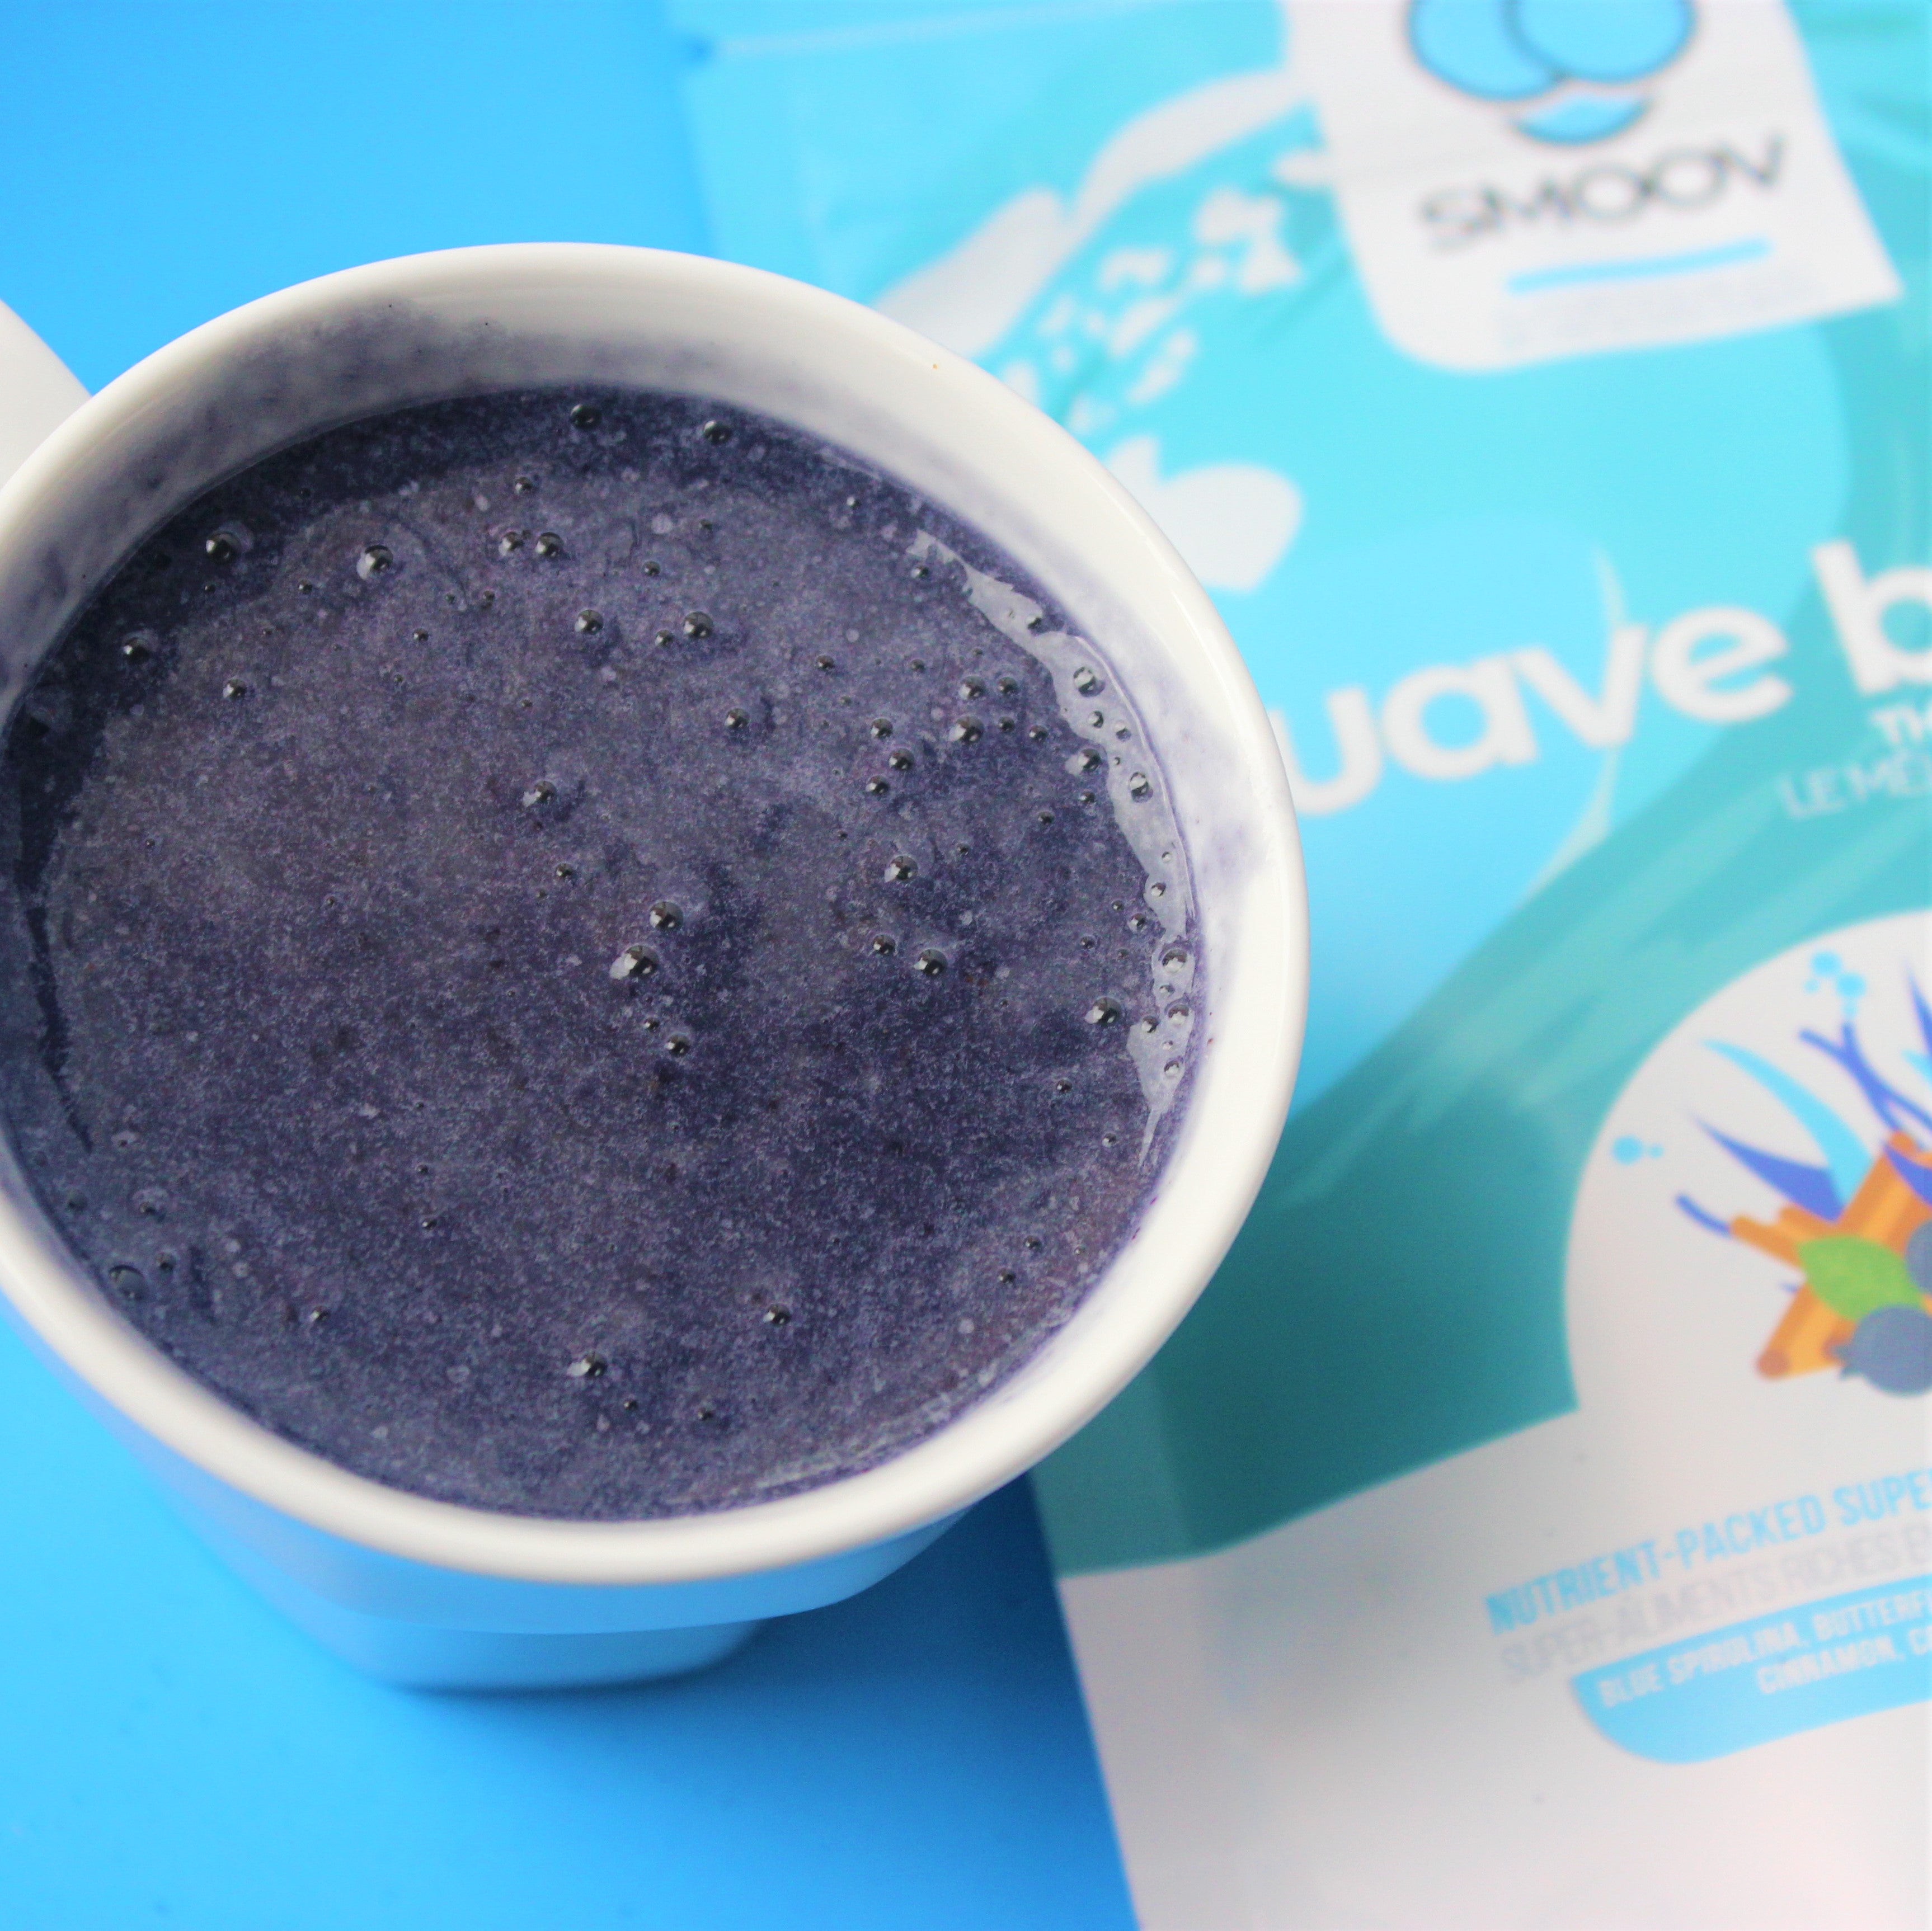 Our wave blend has 6 powerful antioxidant and vitamin B rich foods for a refreshing way to enhance energy levels, improve immunity and digestion.